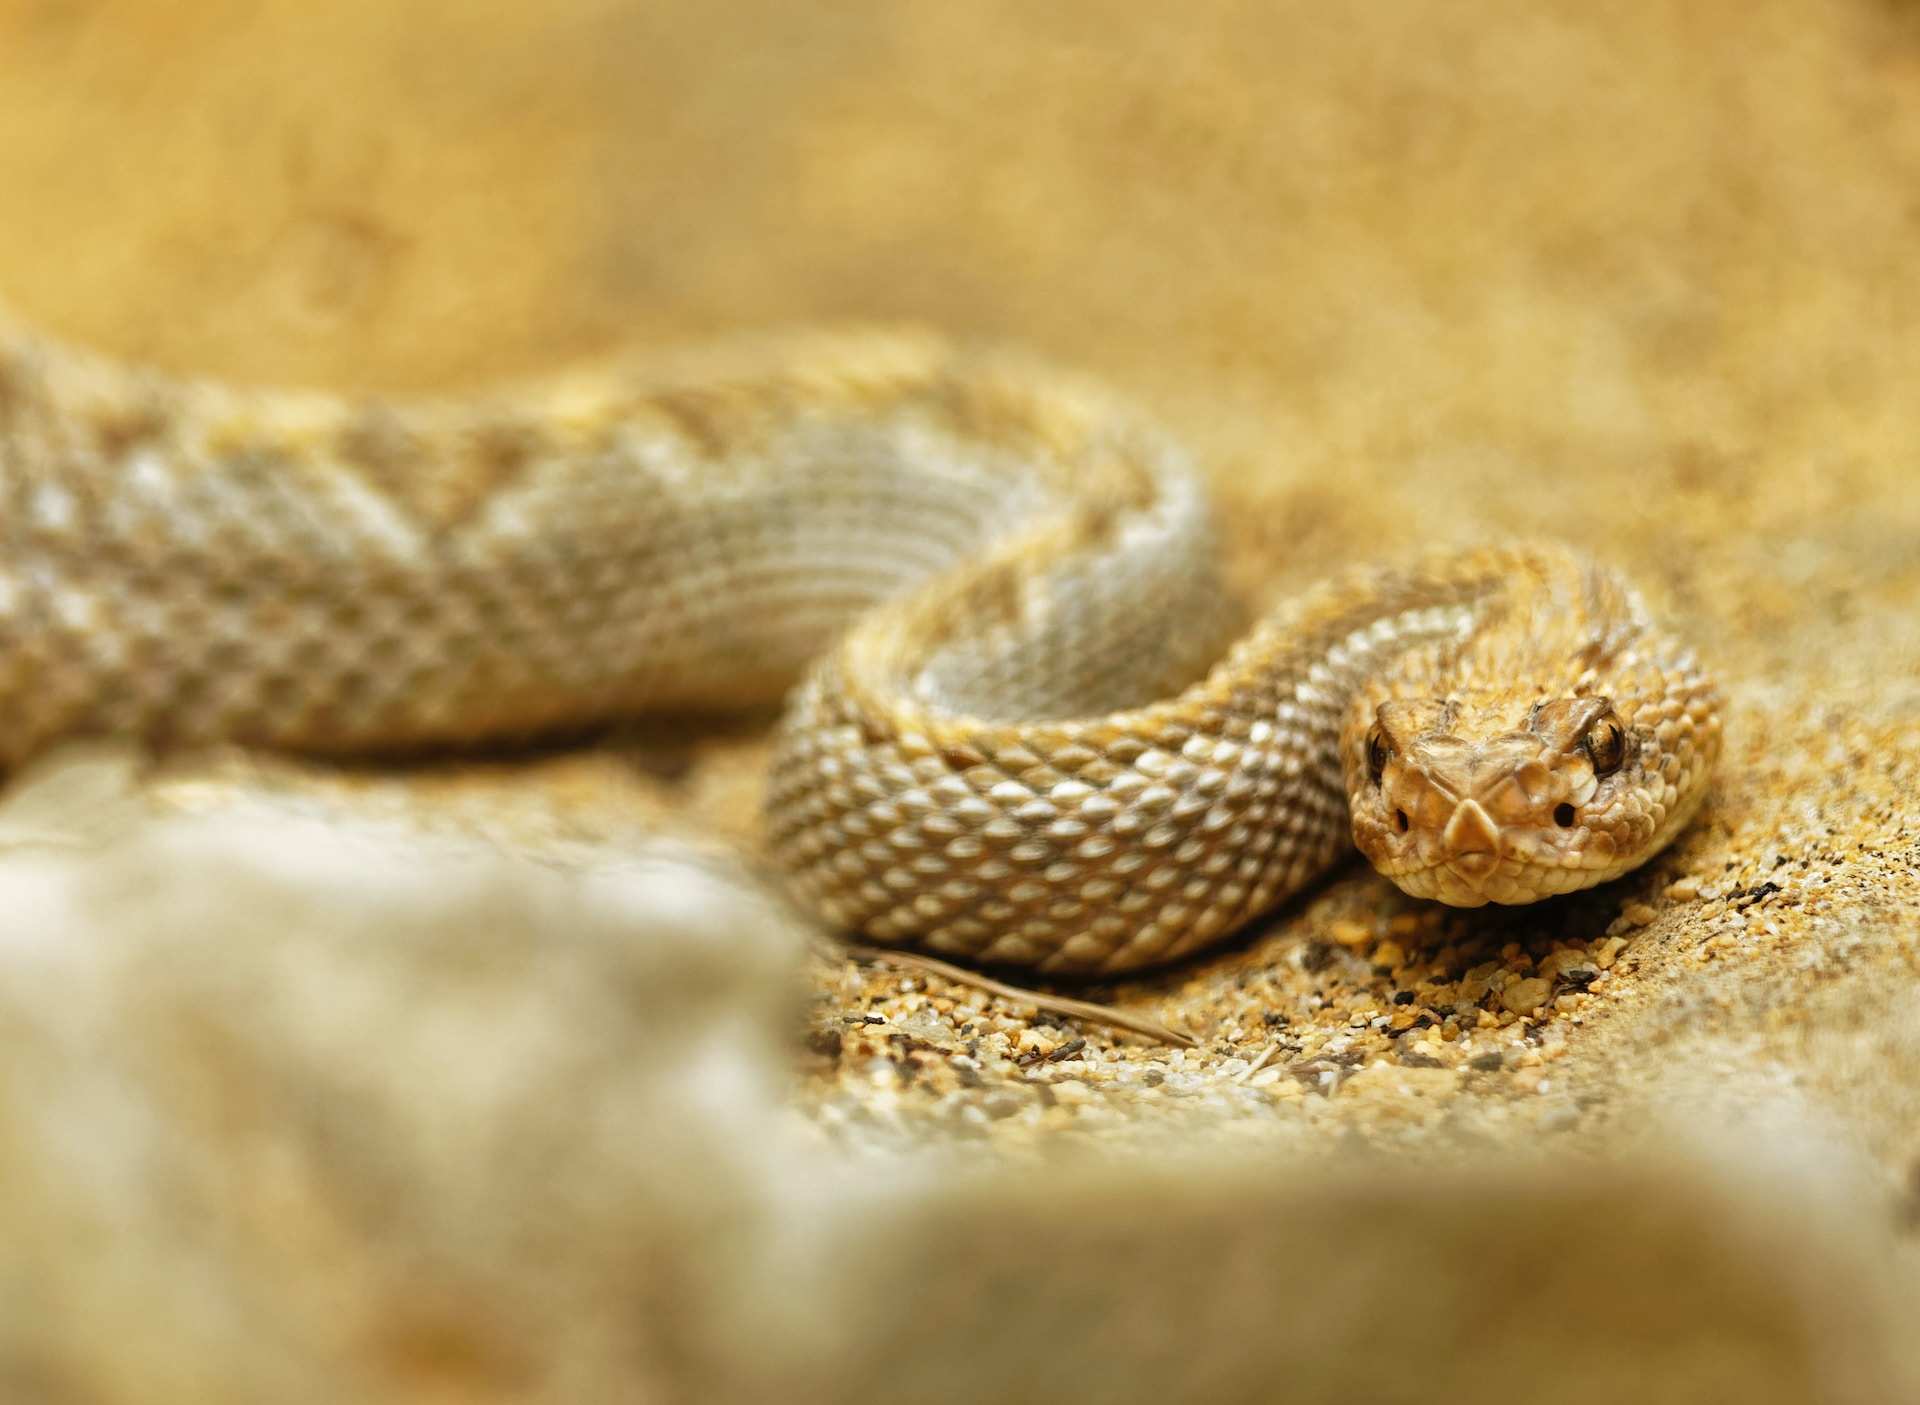 Here are the 11 poisonous snakes to avoid during your visit to Indiana.